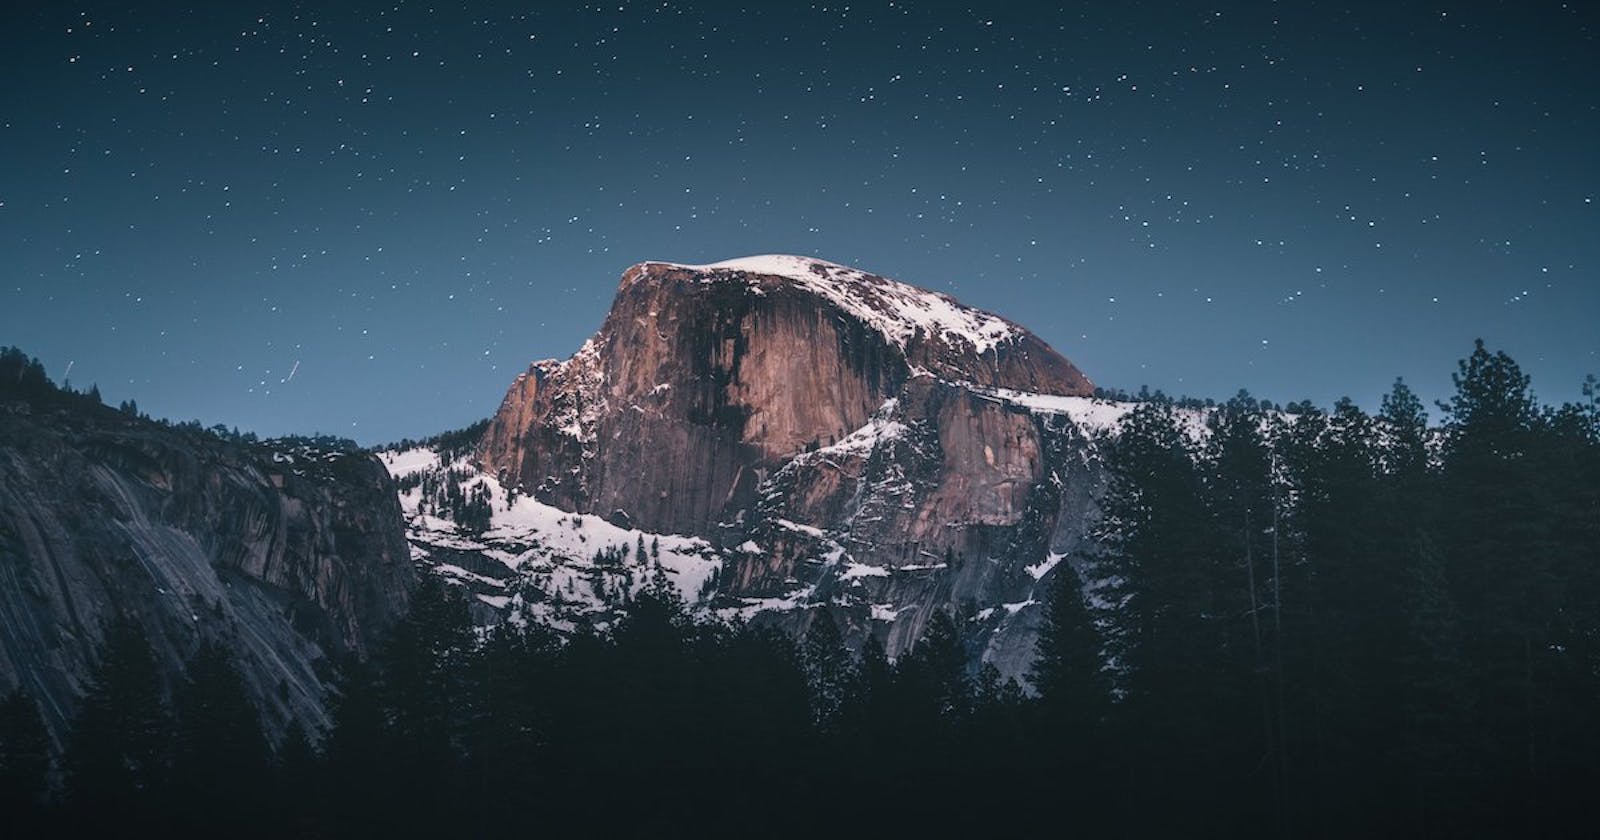 Wallpapers From elementaryOS